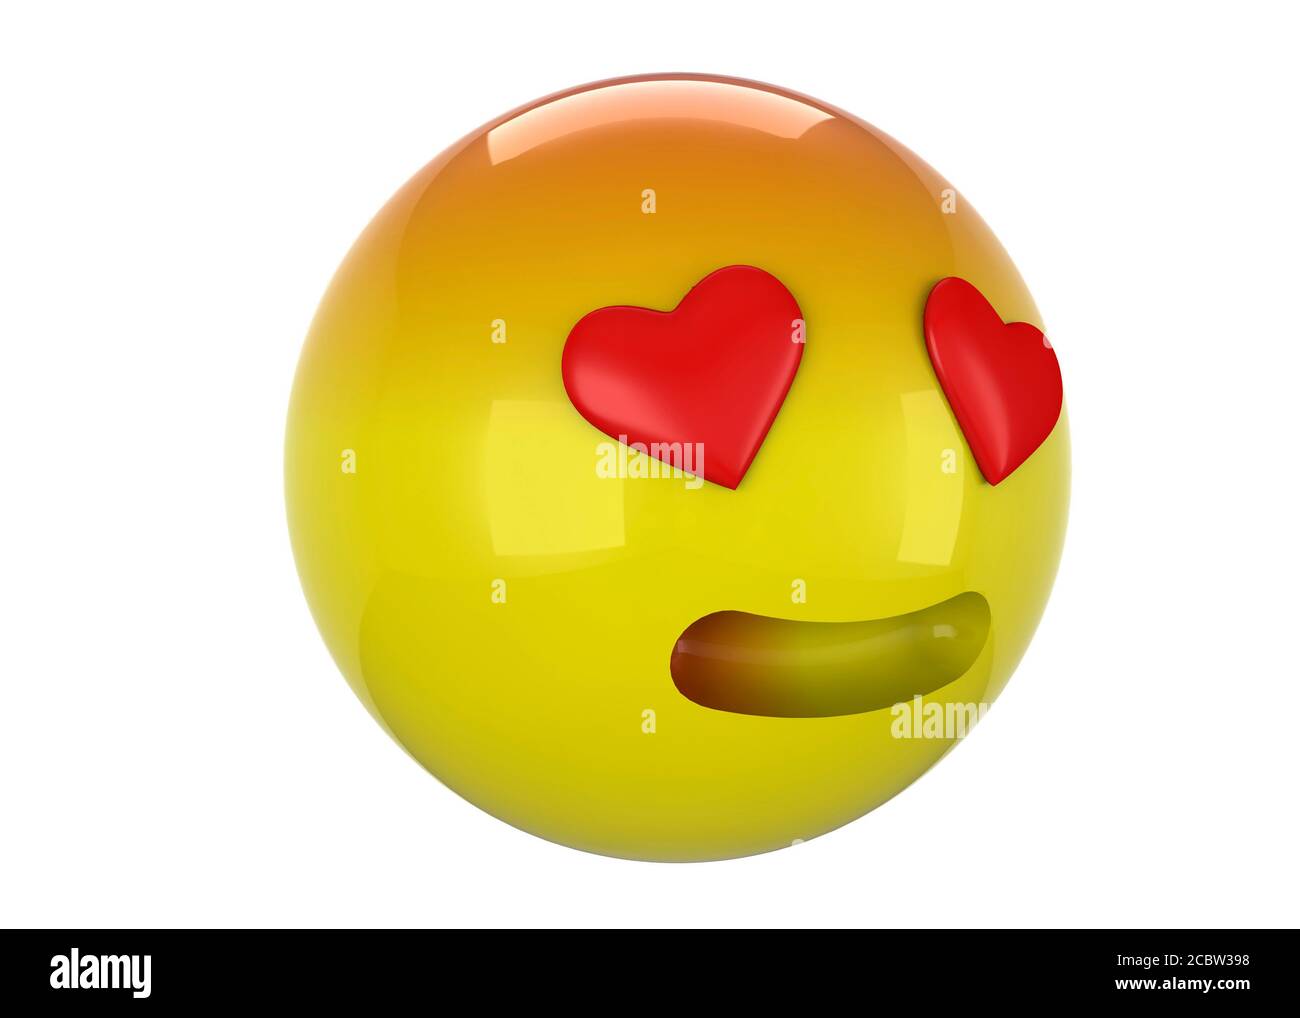 The Enamored Emoticon - 3D Stock Photo